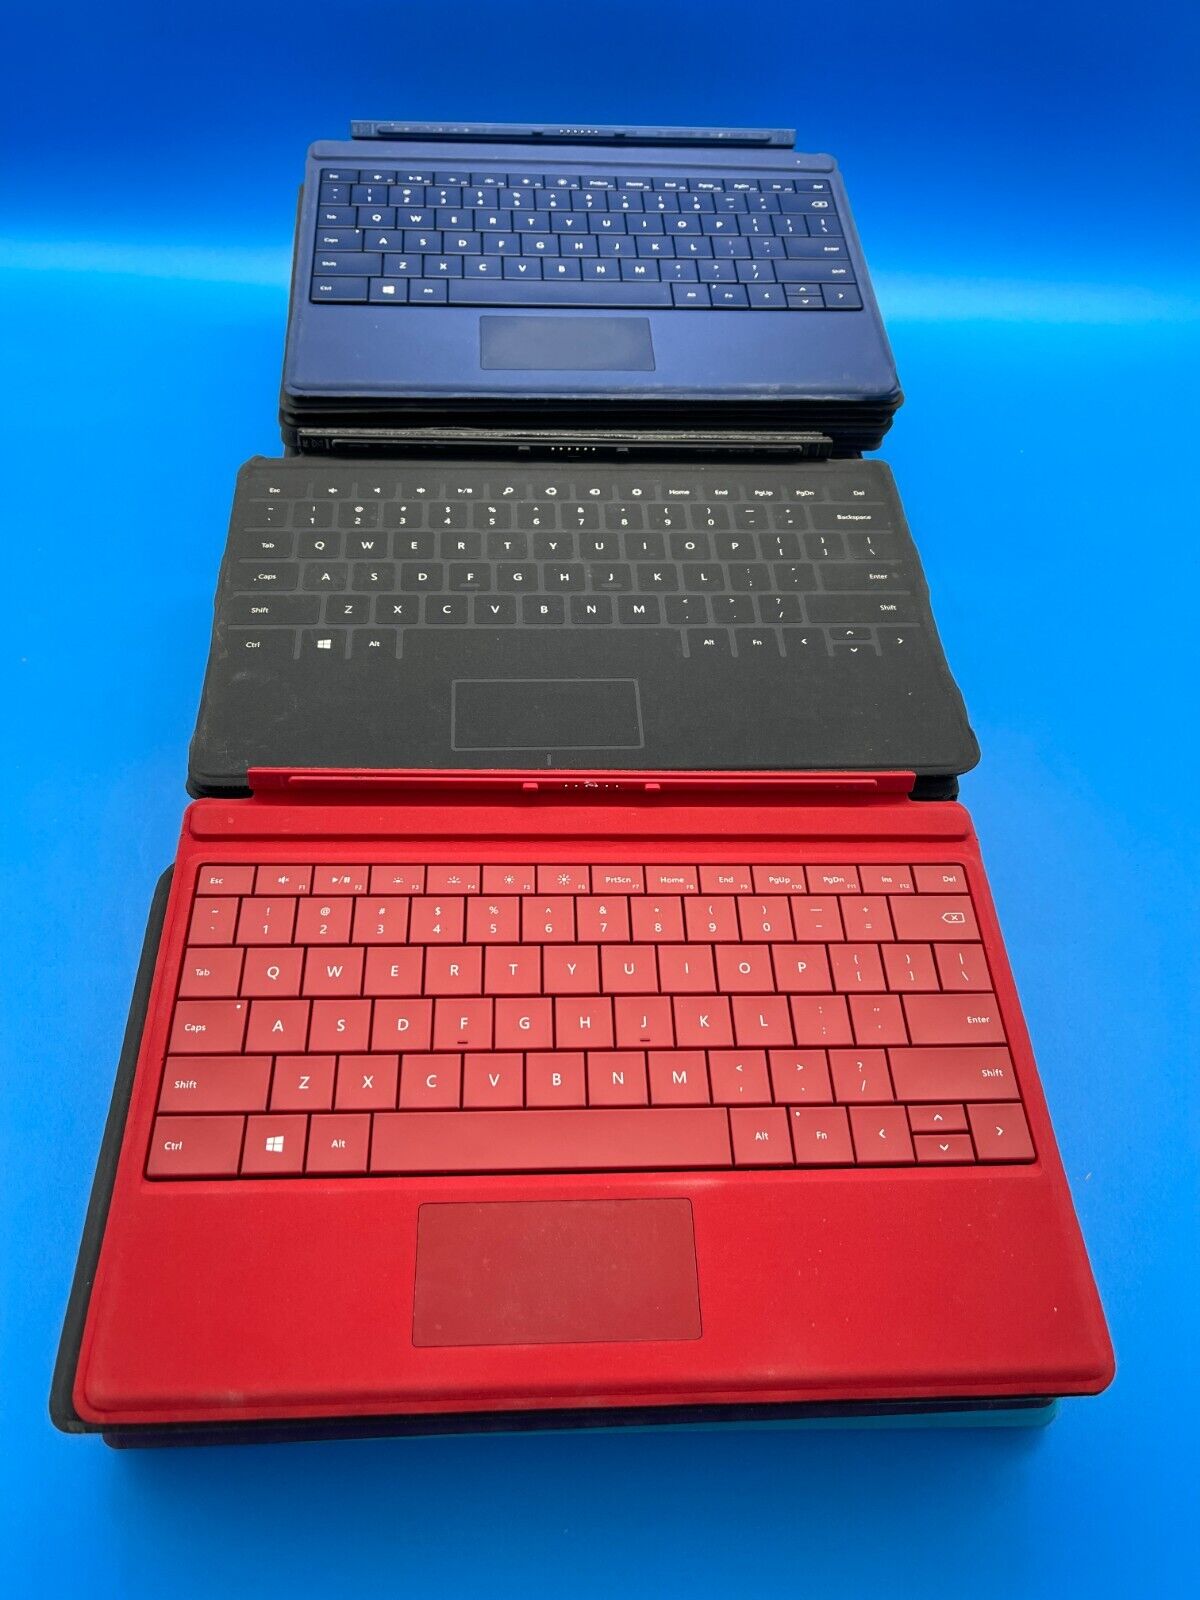 HUGE Lot of Microsoft Surface Keyboards - Mixed Colors - 46 Total - PARTS